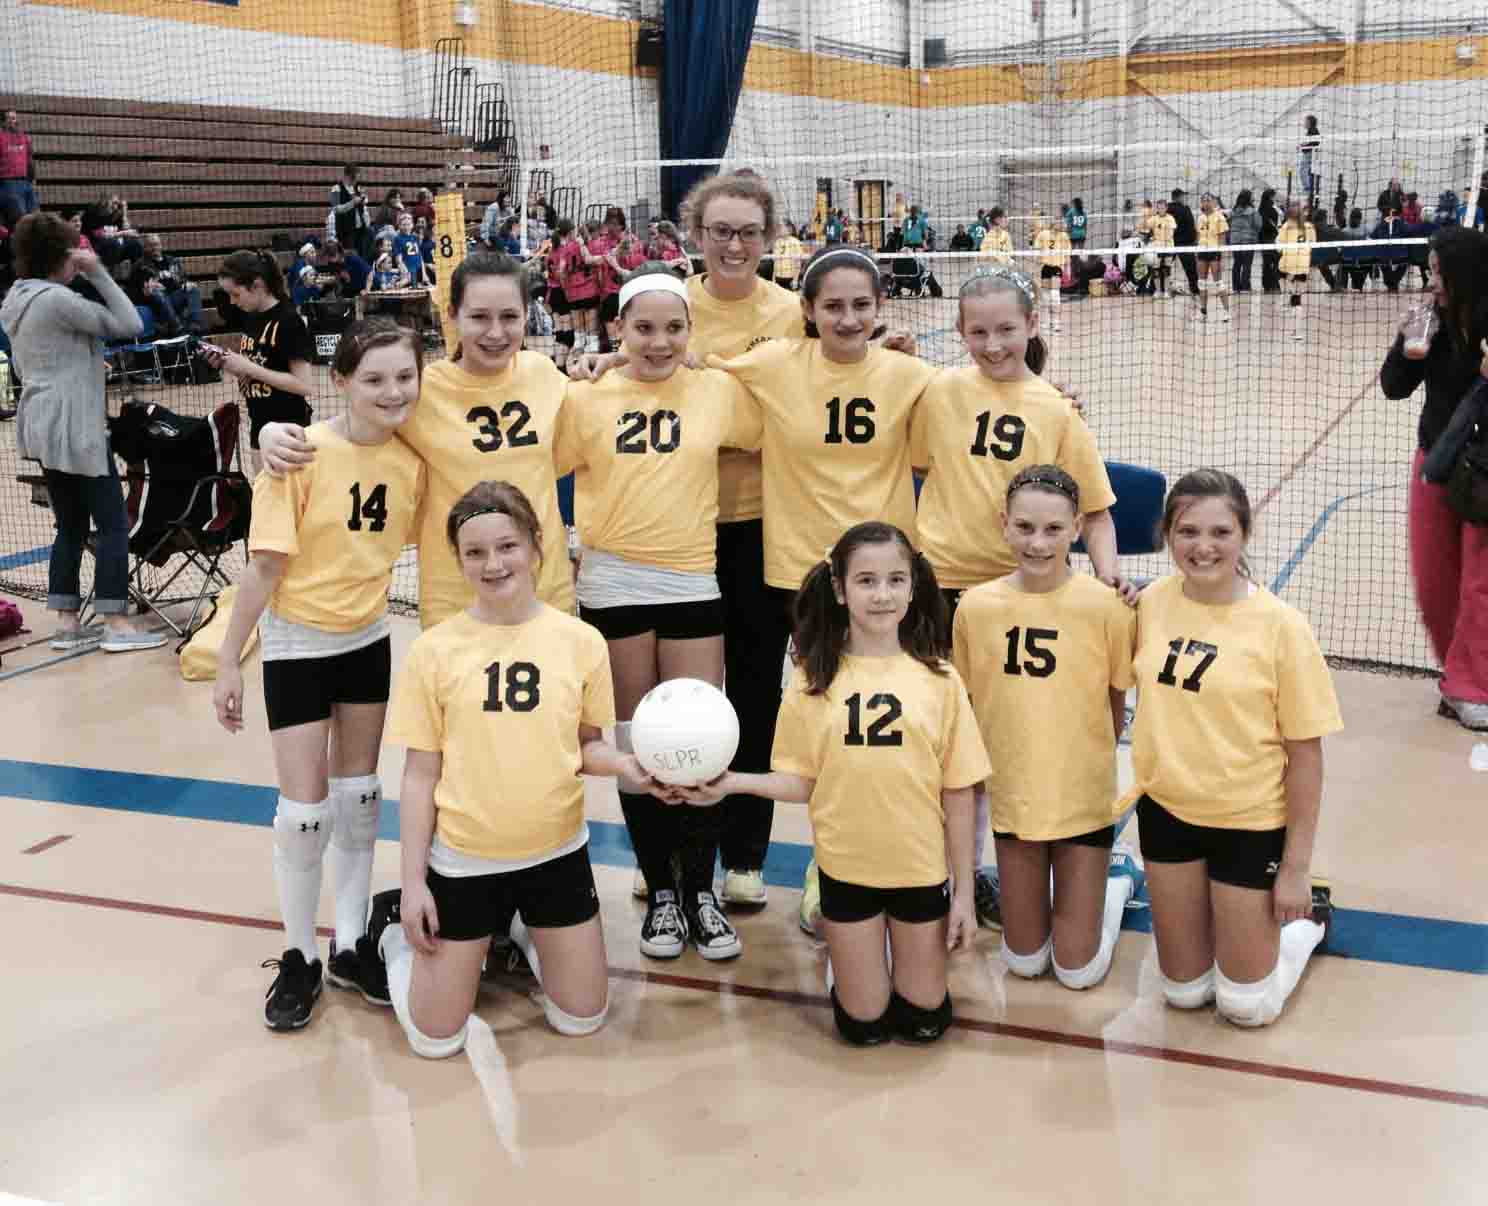  After a weekend tournament, senior Ashley Bearden poses with the volleyball team she coaches. Bearden coaches a group of 12 year old girls through the Southern Lakes Parks & Recreation volleyball program.